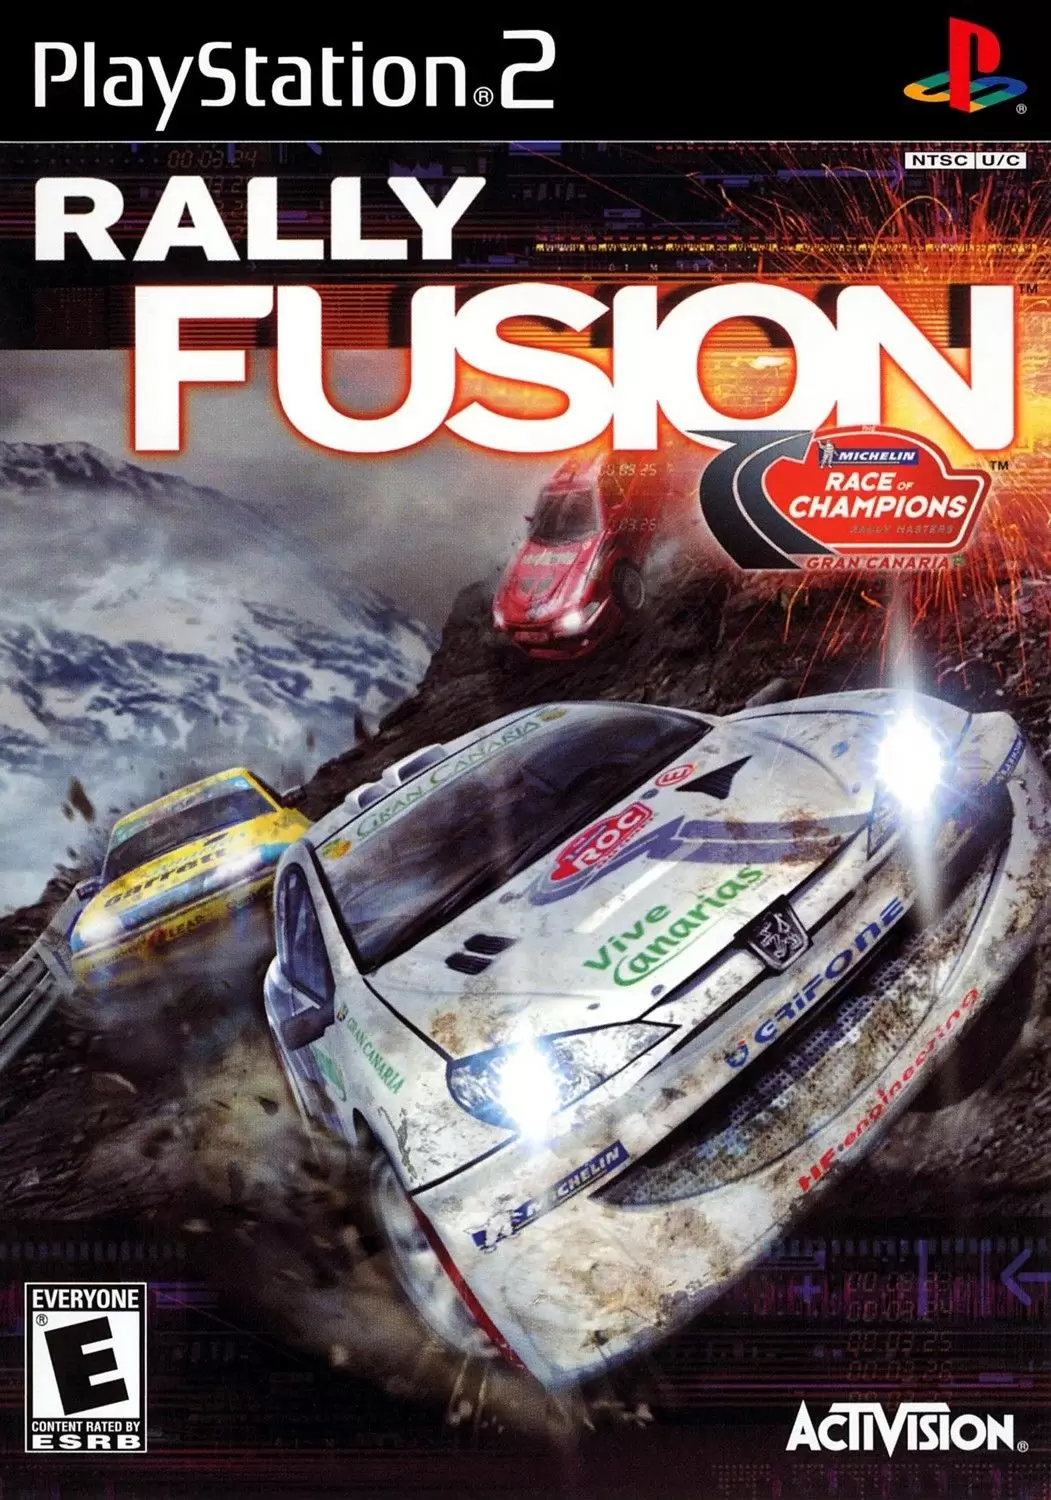 PS2 Games - Rally Fusion: Race of Champions (NTSC)